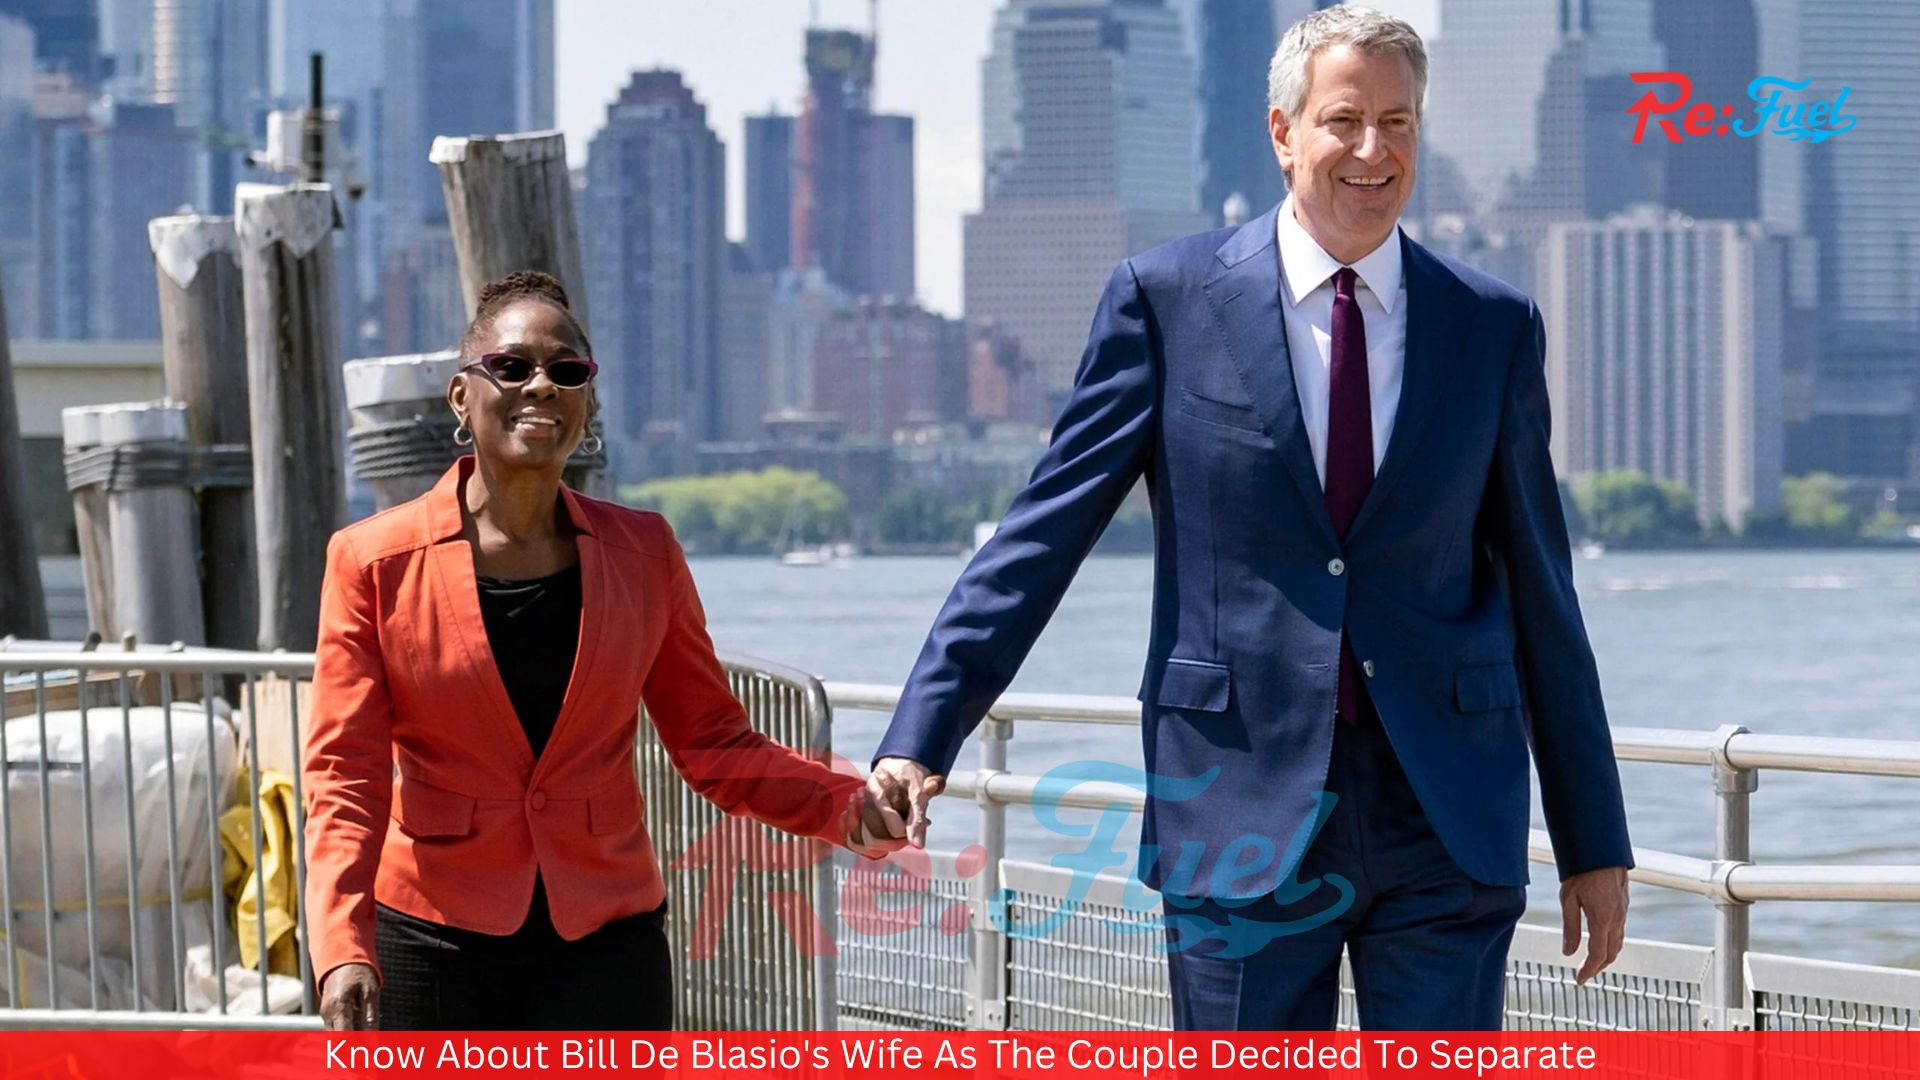 Know About Bill De Blasio's Wife As The Couple Decided To Separate